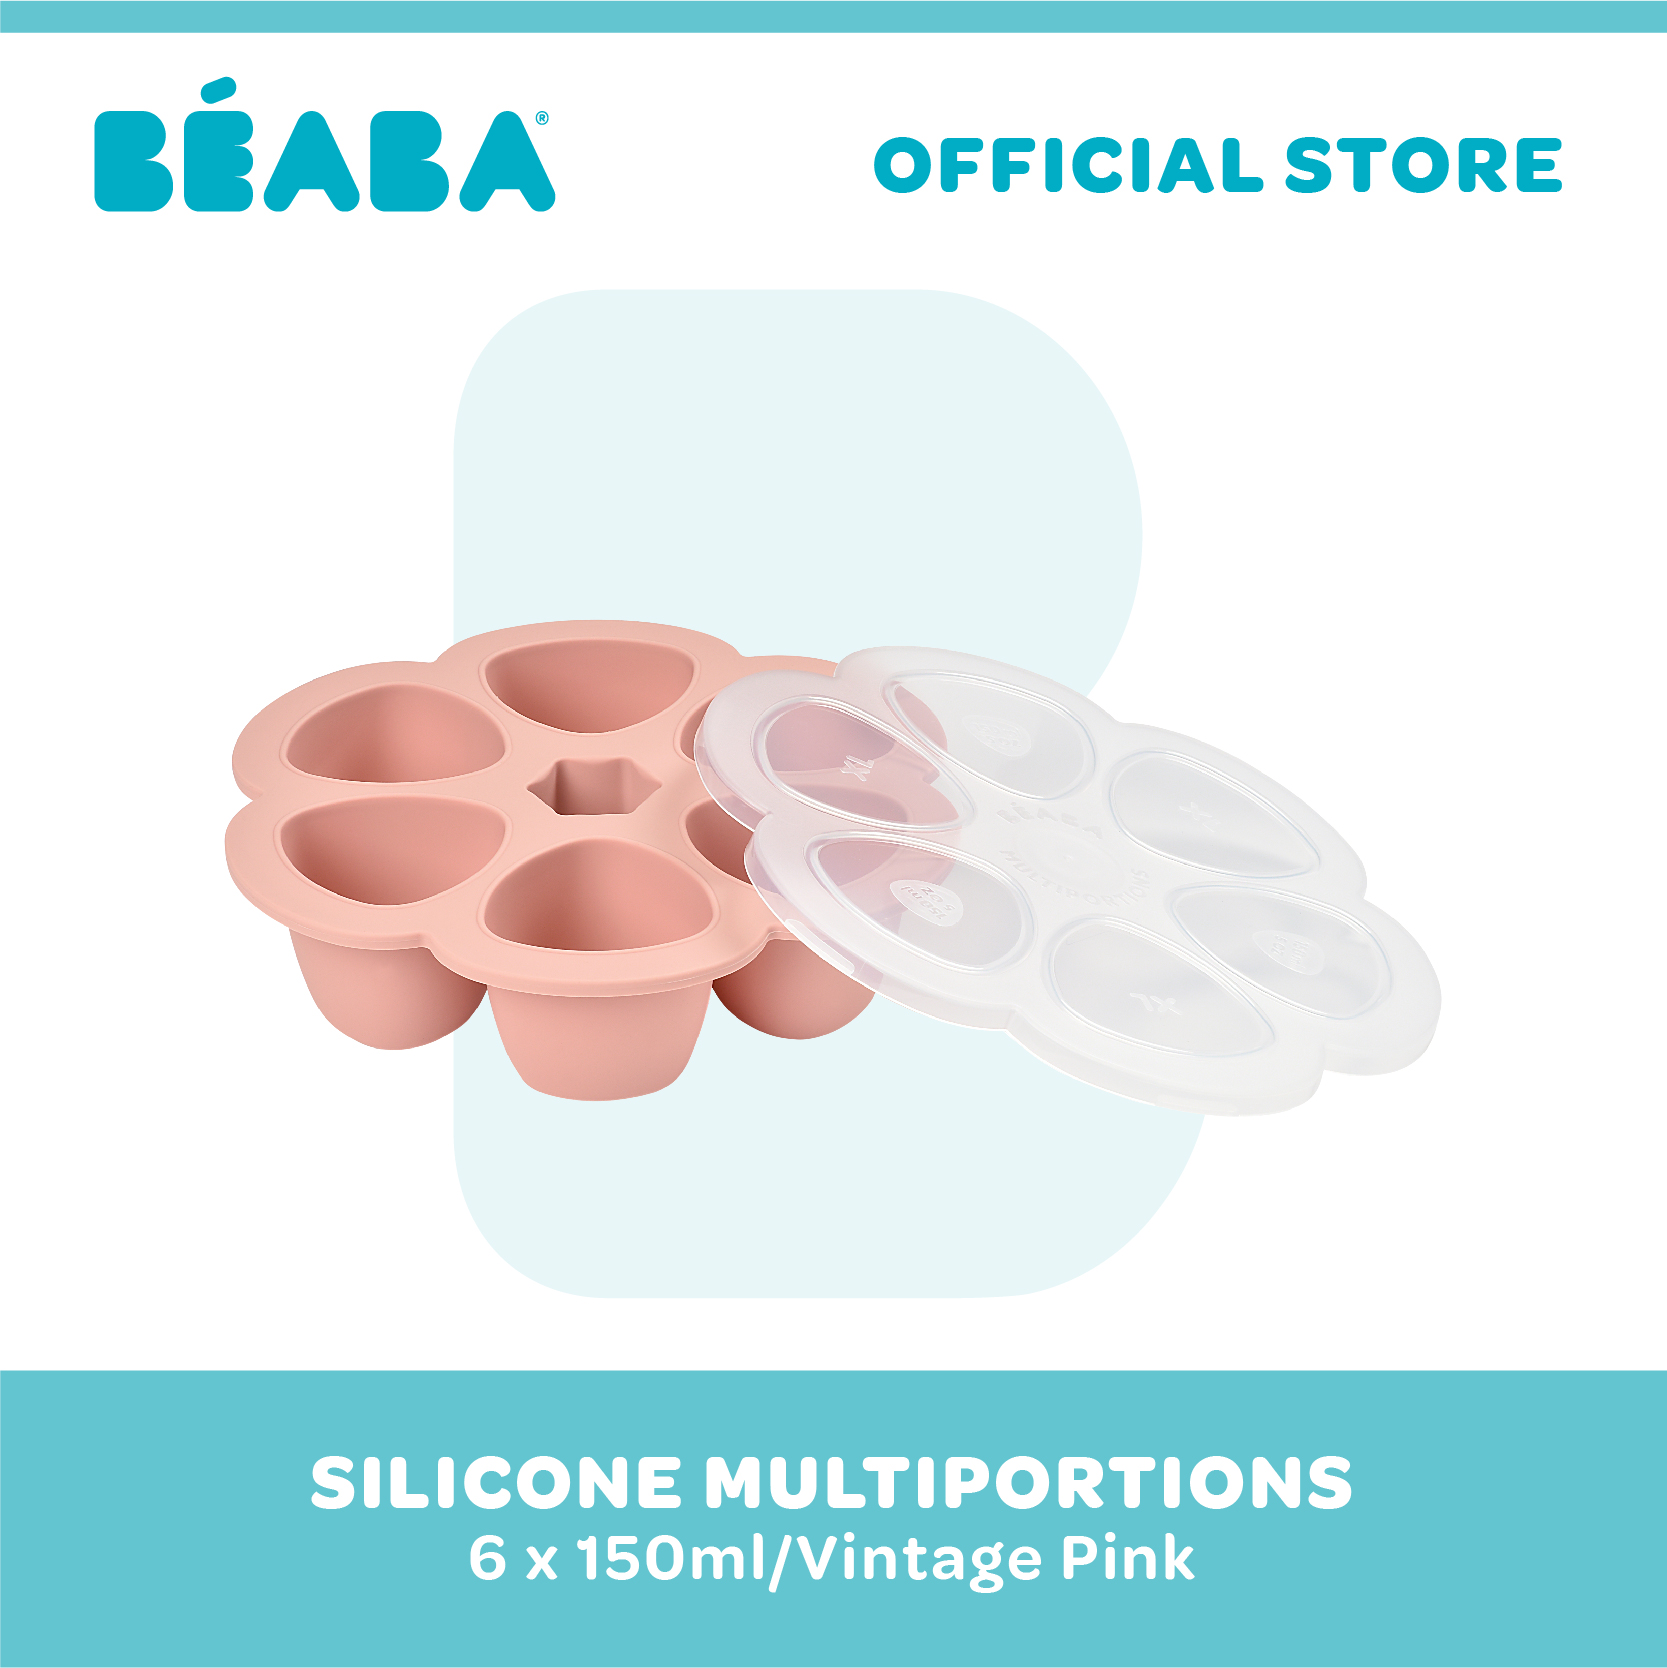 Shop Beaba Silicone Multiportions 6 x 150ml online